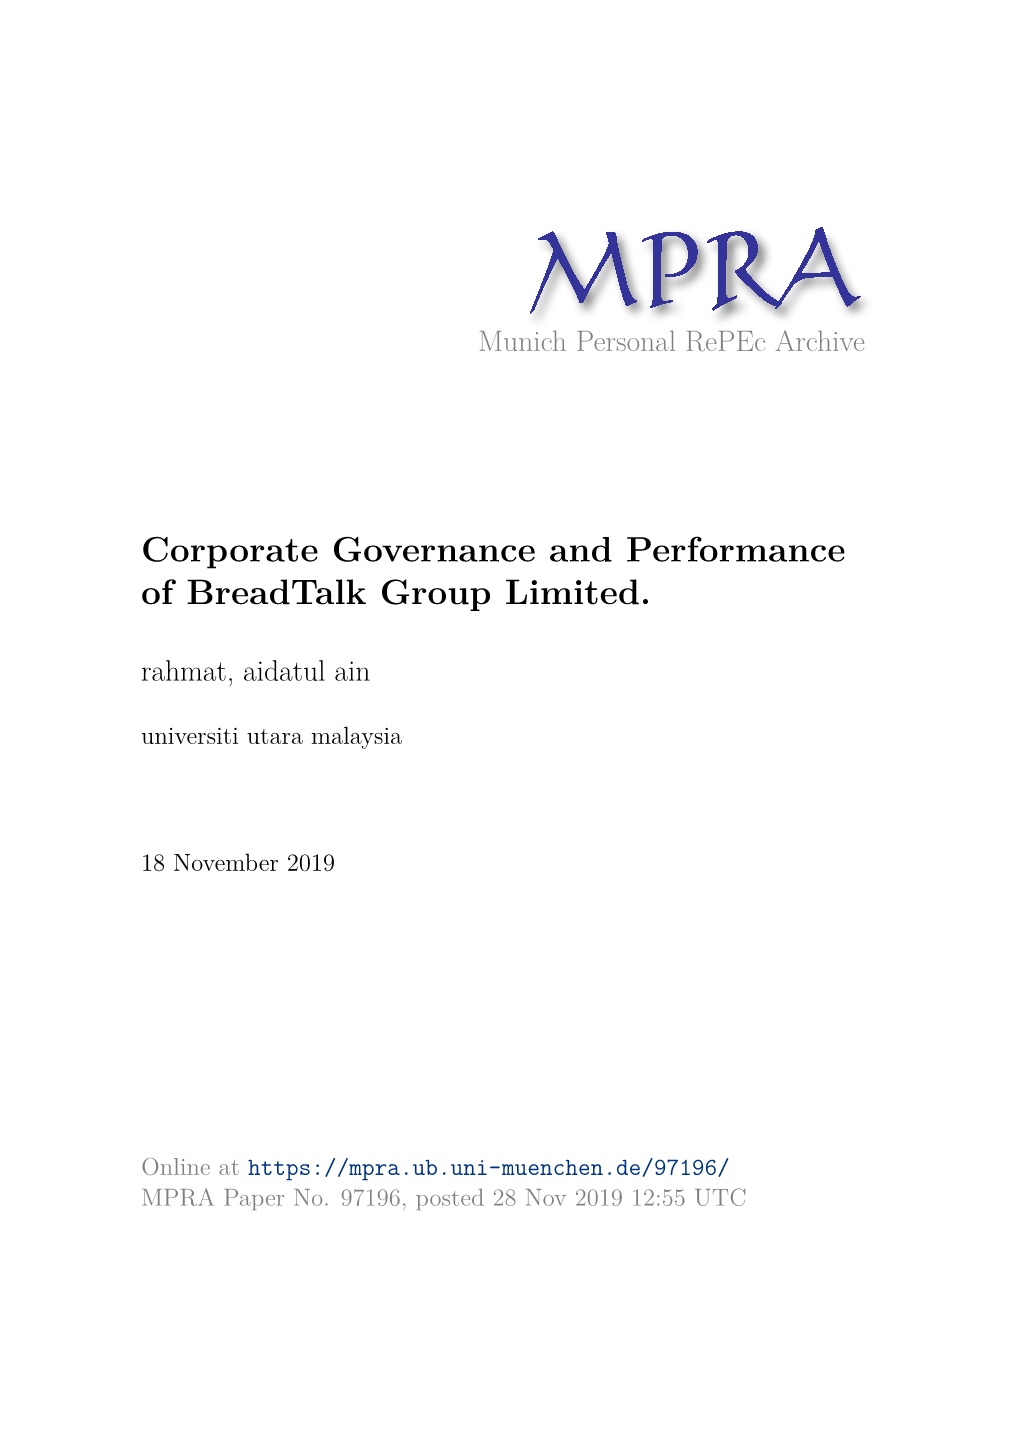 Corporate Governance and Performance of Breadtalk Group Limited